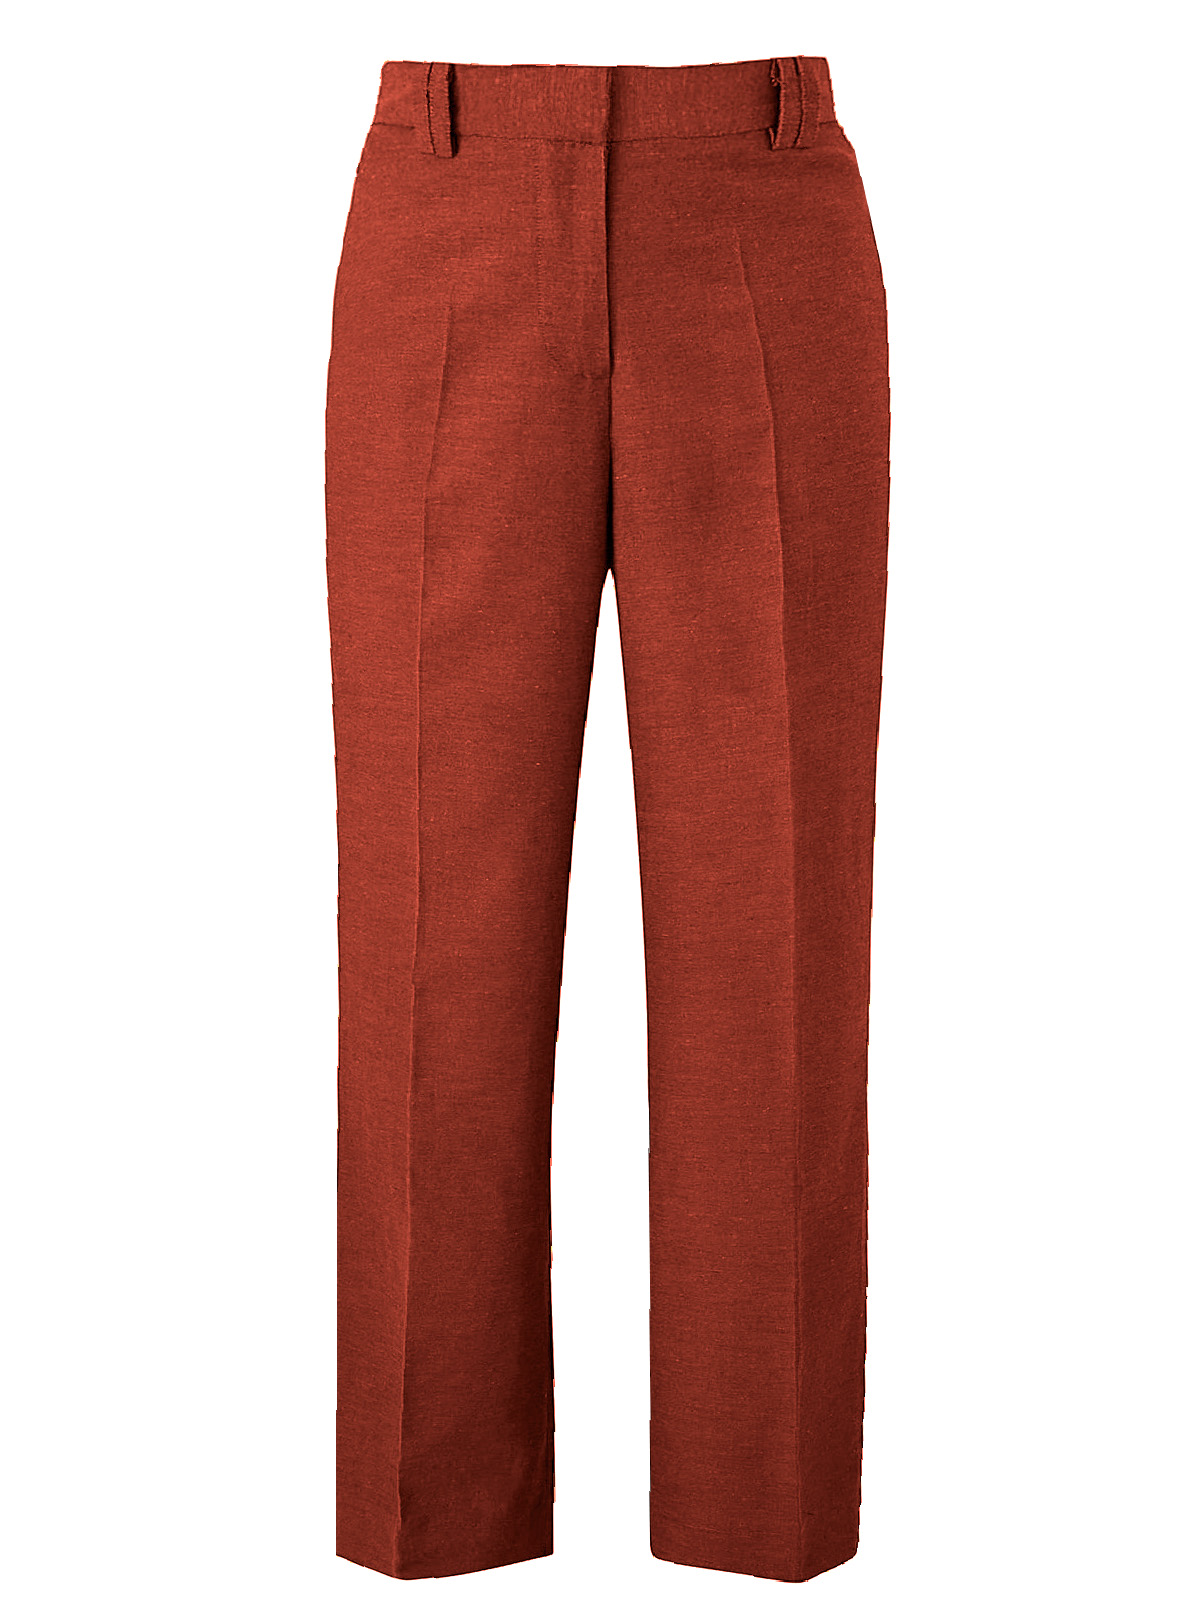 Shop Joanna Hope Petite Trousers for Women up to 70 Off  DealDoodle